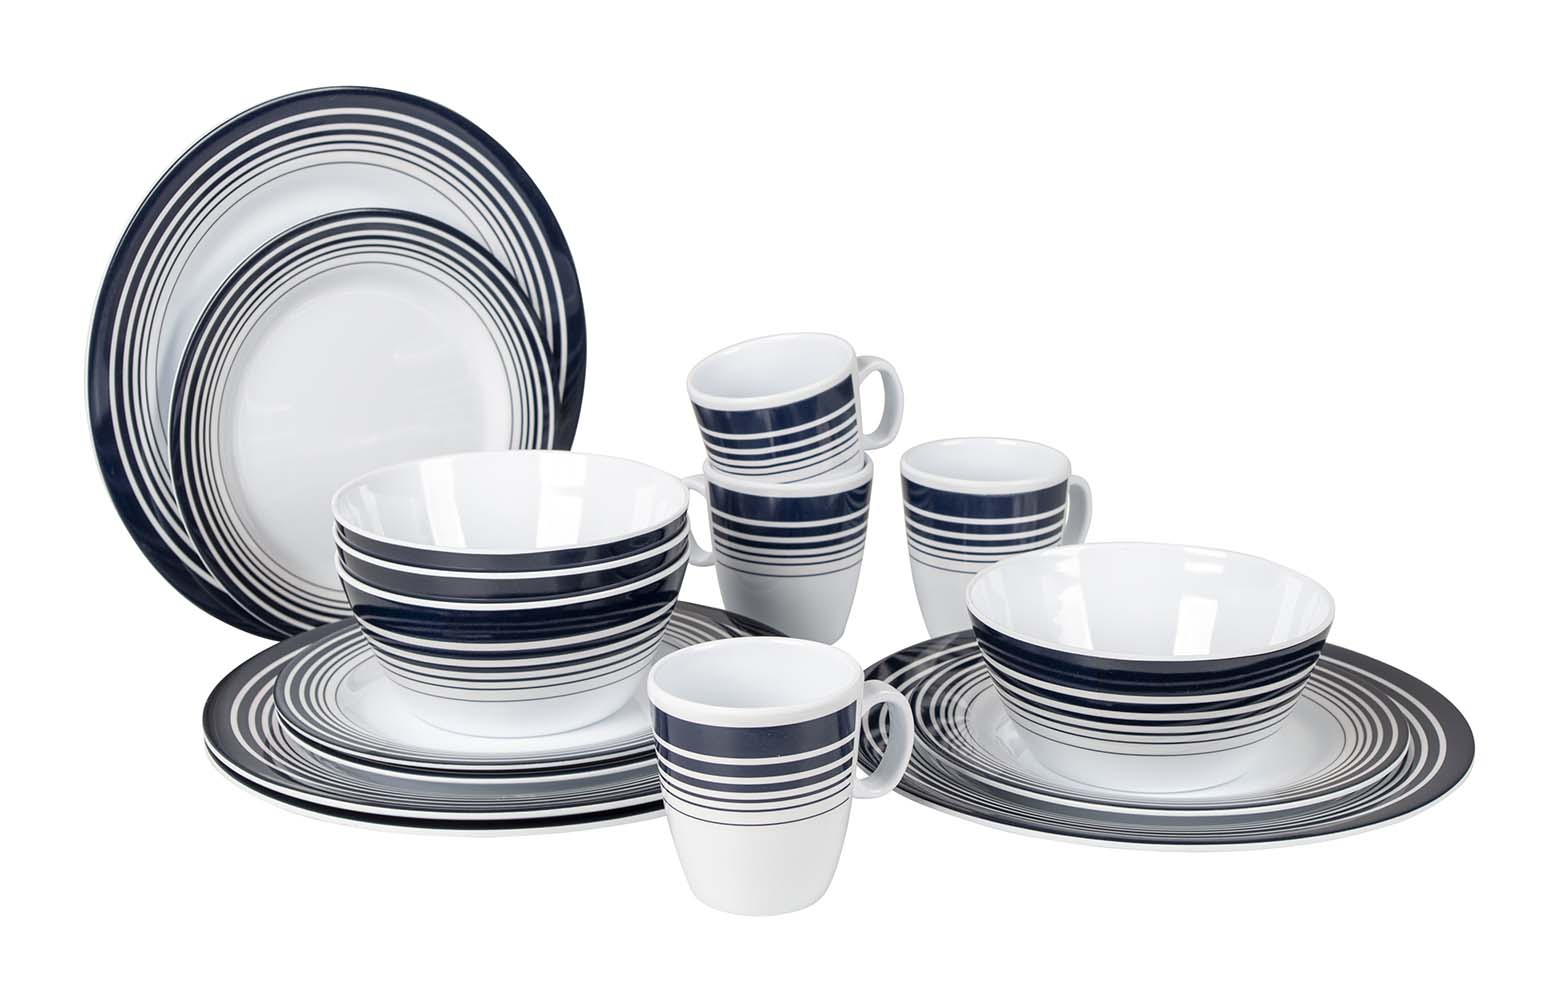 6181079 A 16-piece tableware set made of 100% melamine. This high-quality melamine soup bowl is virtually unbreakable and very light in weight. The cup is also scratch resistant and dishwasher safe. This stylish set is suitable for 4 people and consists of 4 plates, 4 breakfast plates, 4 bowls and 4 mugs.